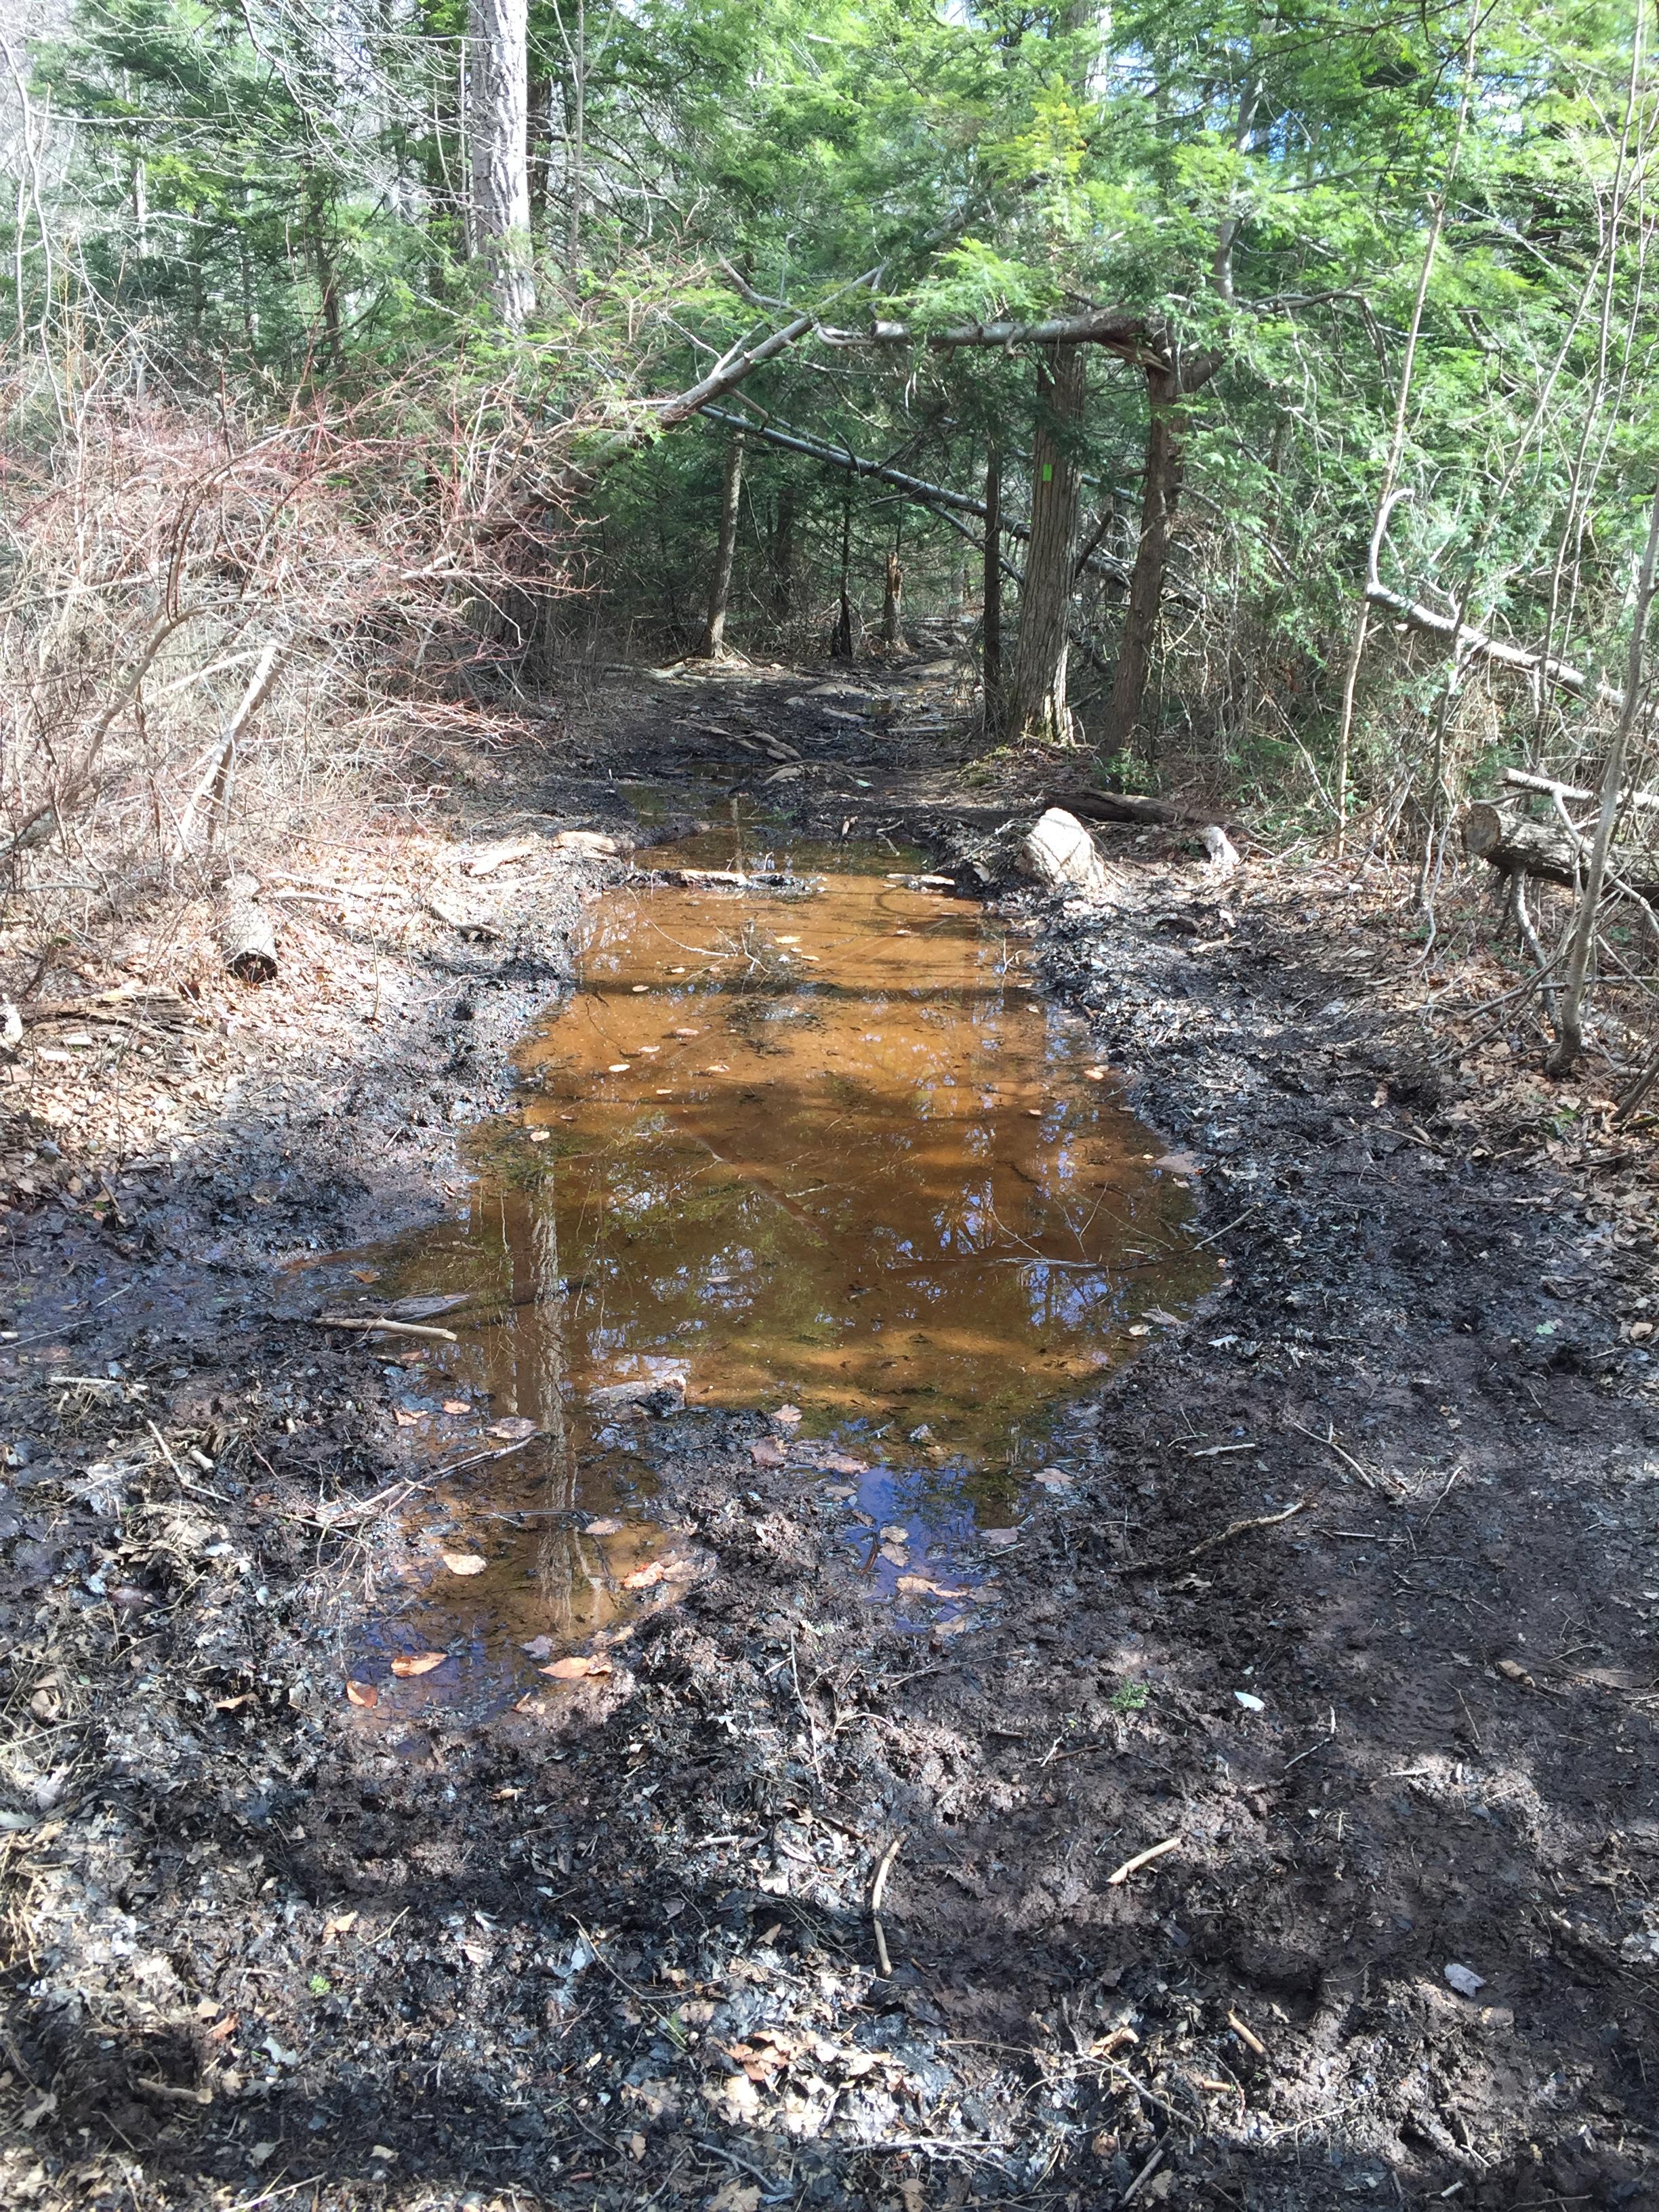 Muddy, damaged trail caused by illegal ORV use.